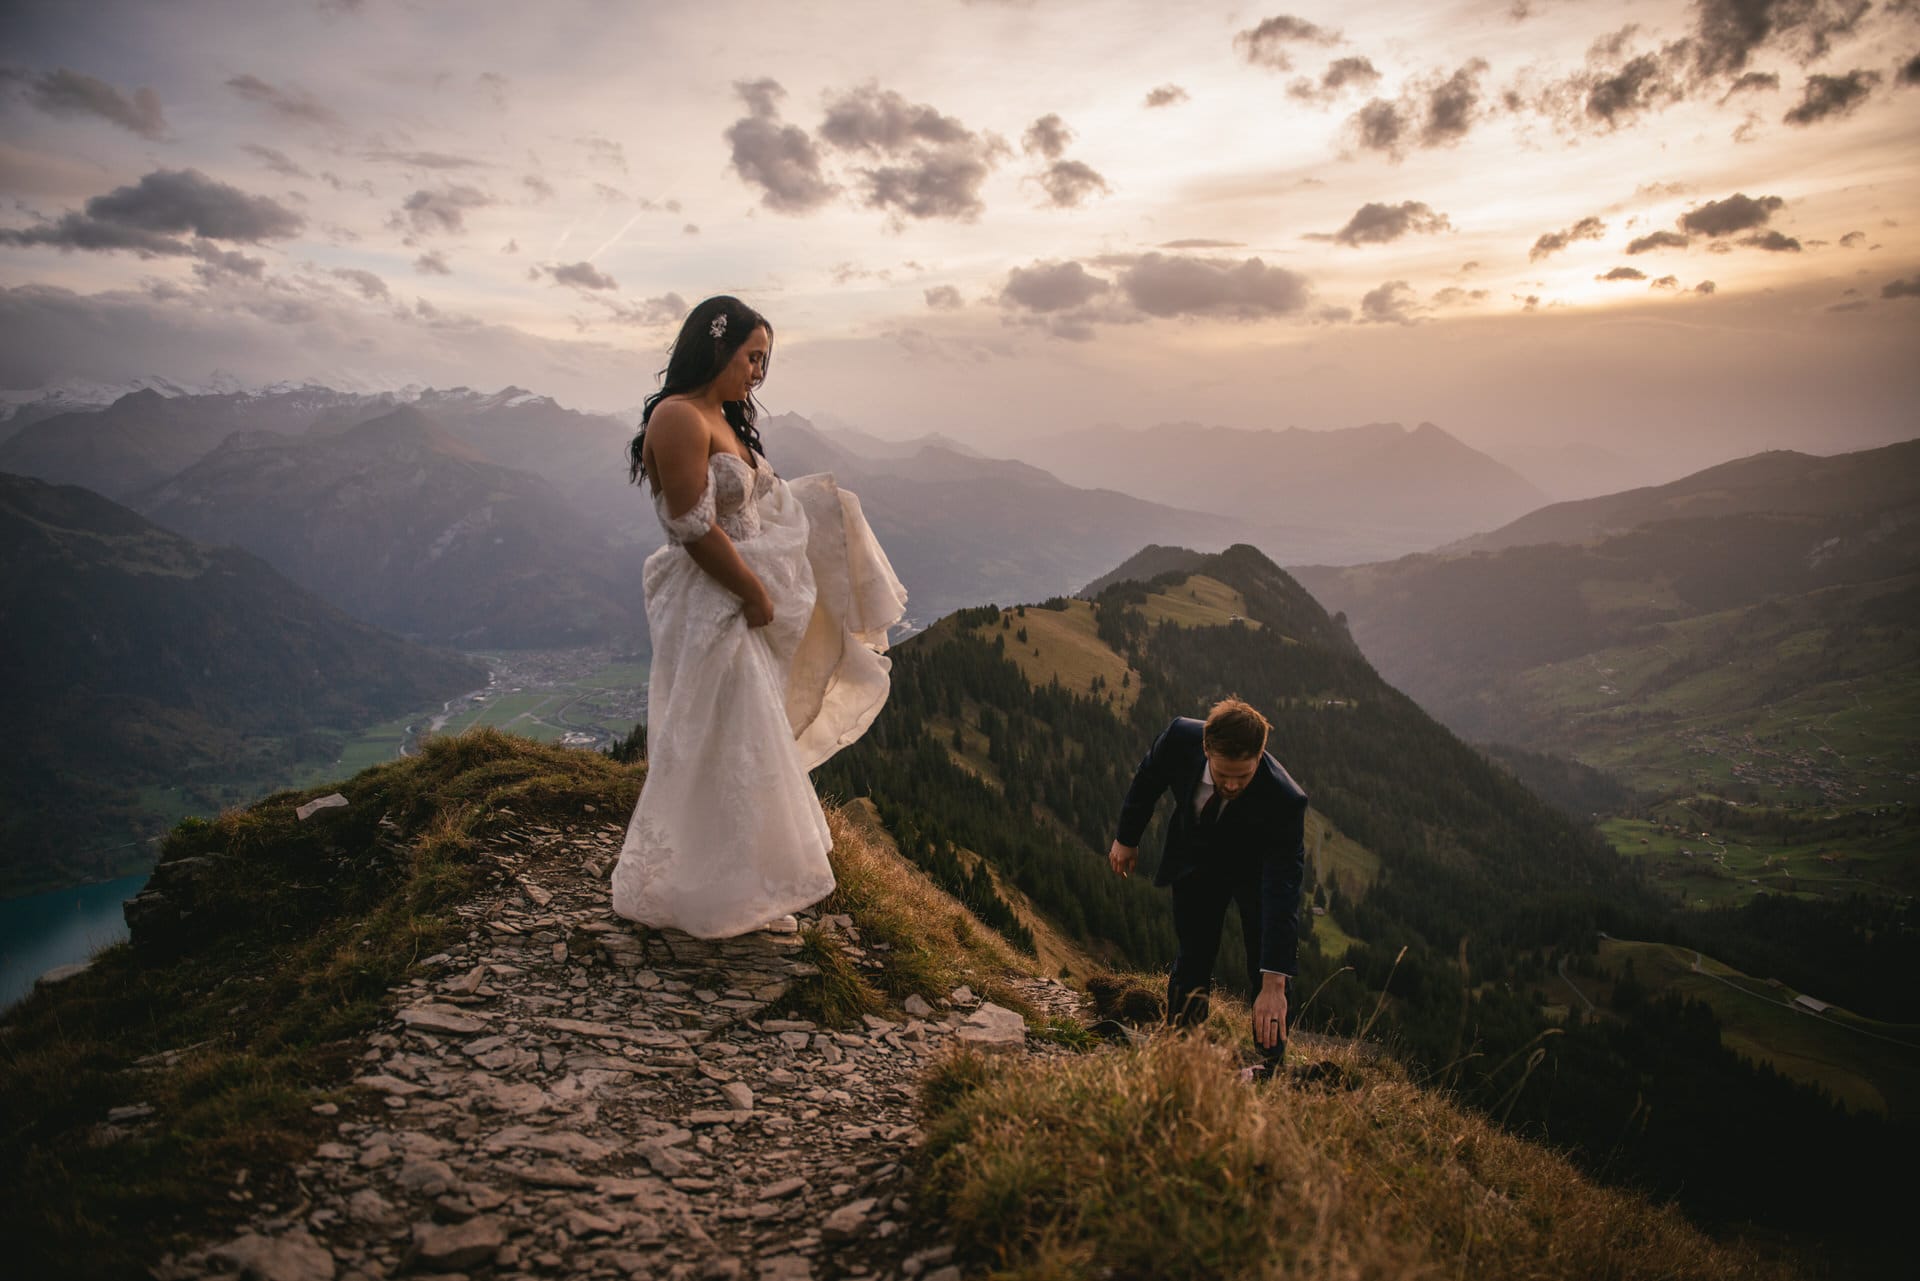 Couple on their elopement day in the Interlaken region of Switzerland - sunset photoshoot on top of the mountain